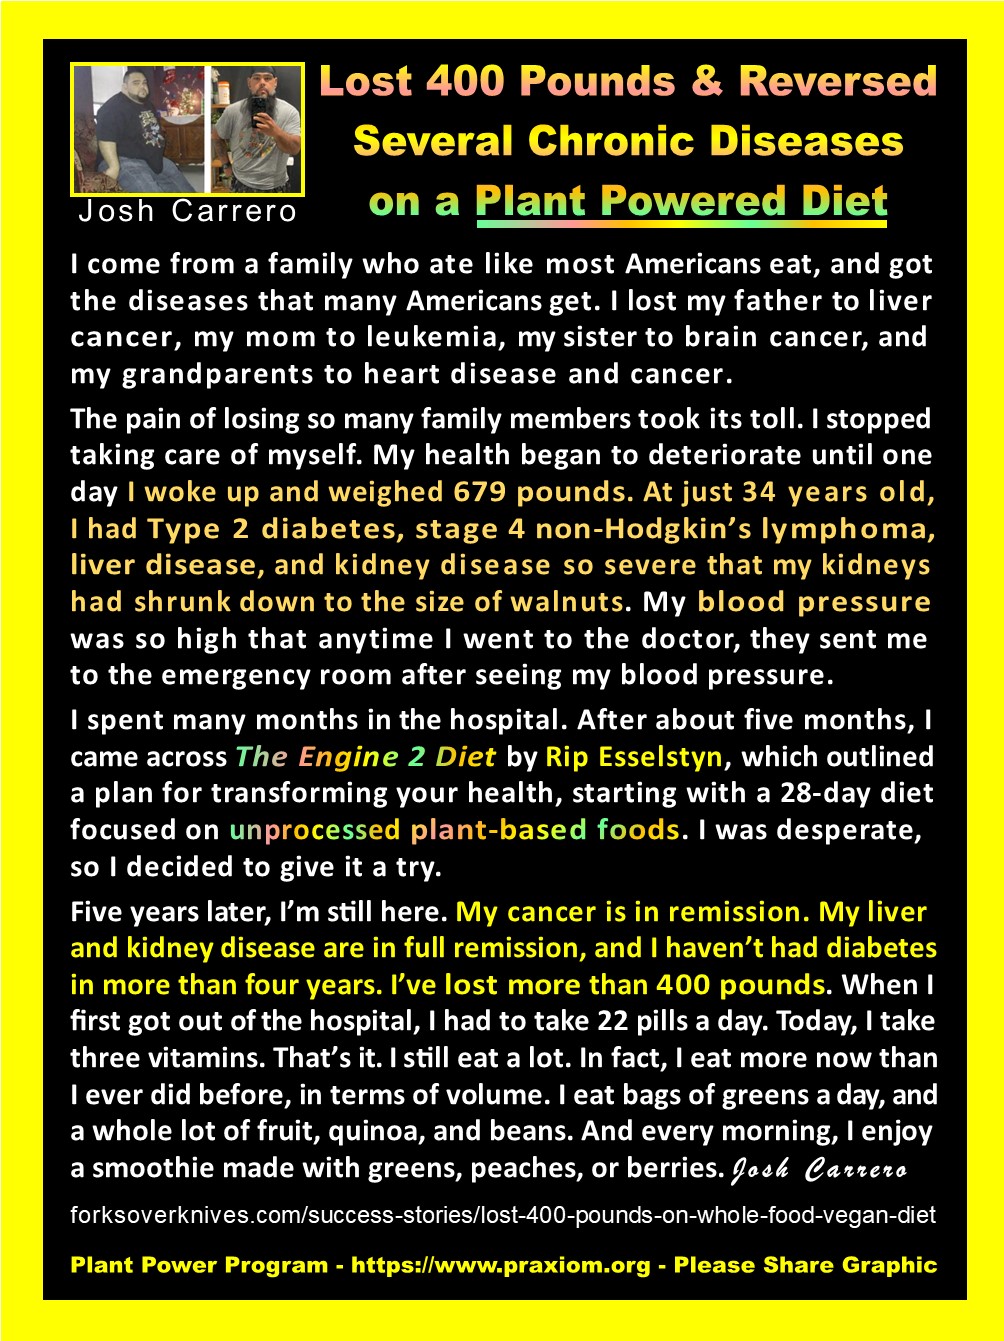 Josh Carrero Lost 400 Pounds and Reversed Several Chronic
        Diseases on a Whole-Food Vegan Diet